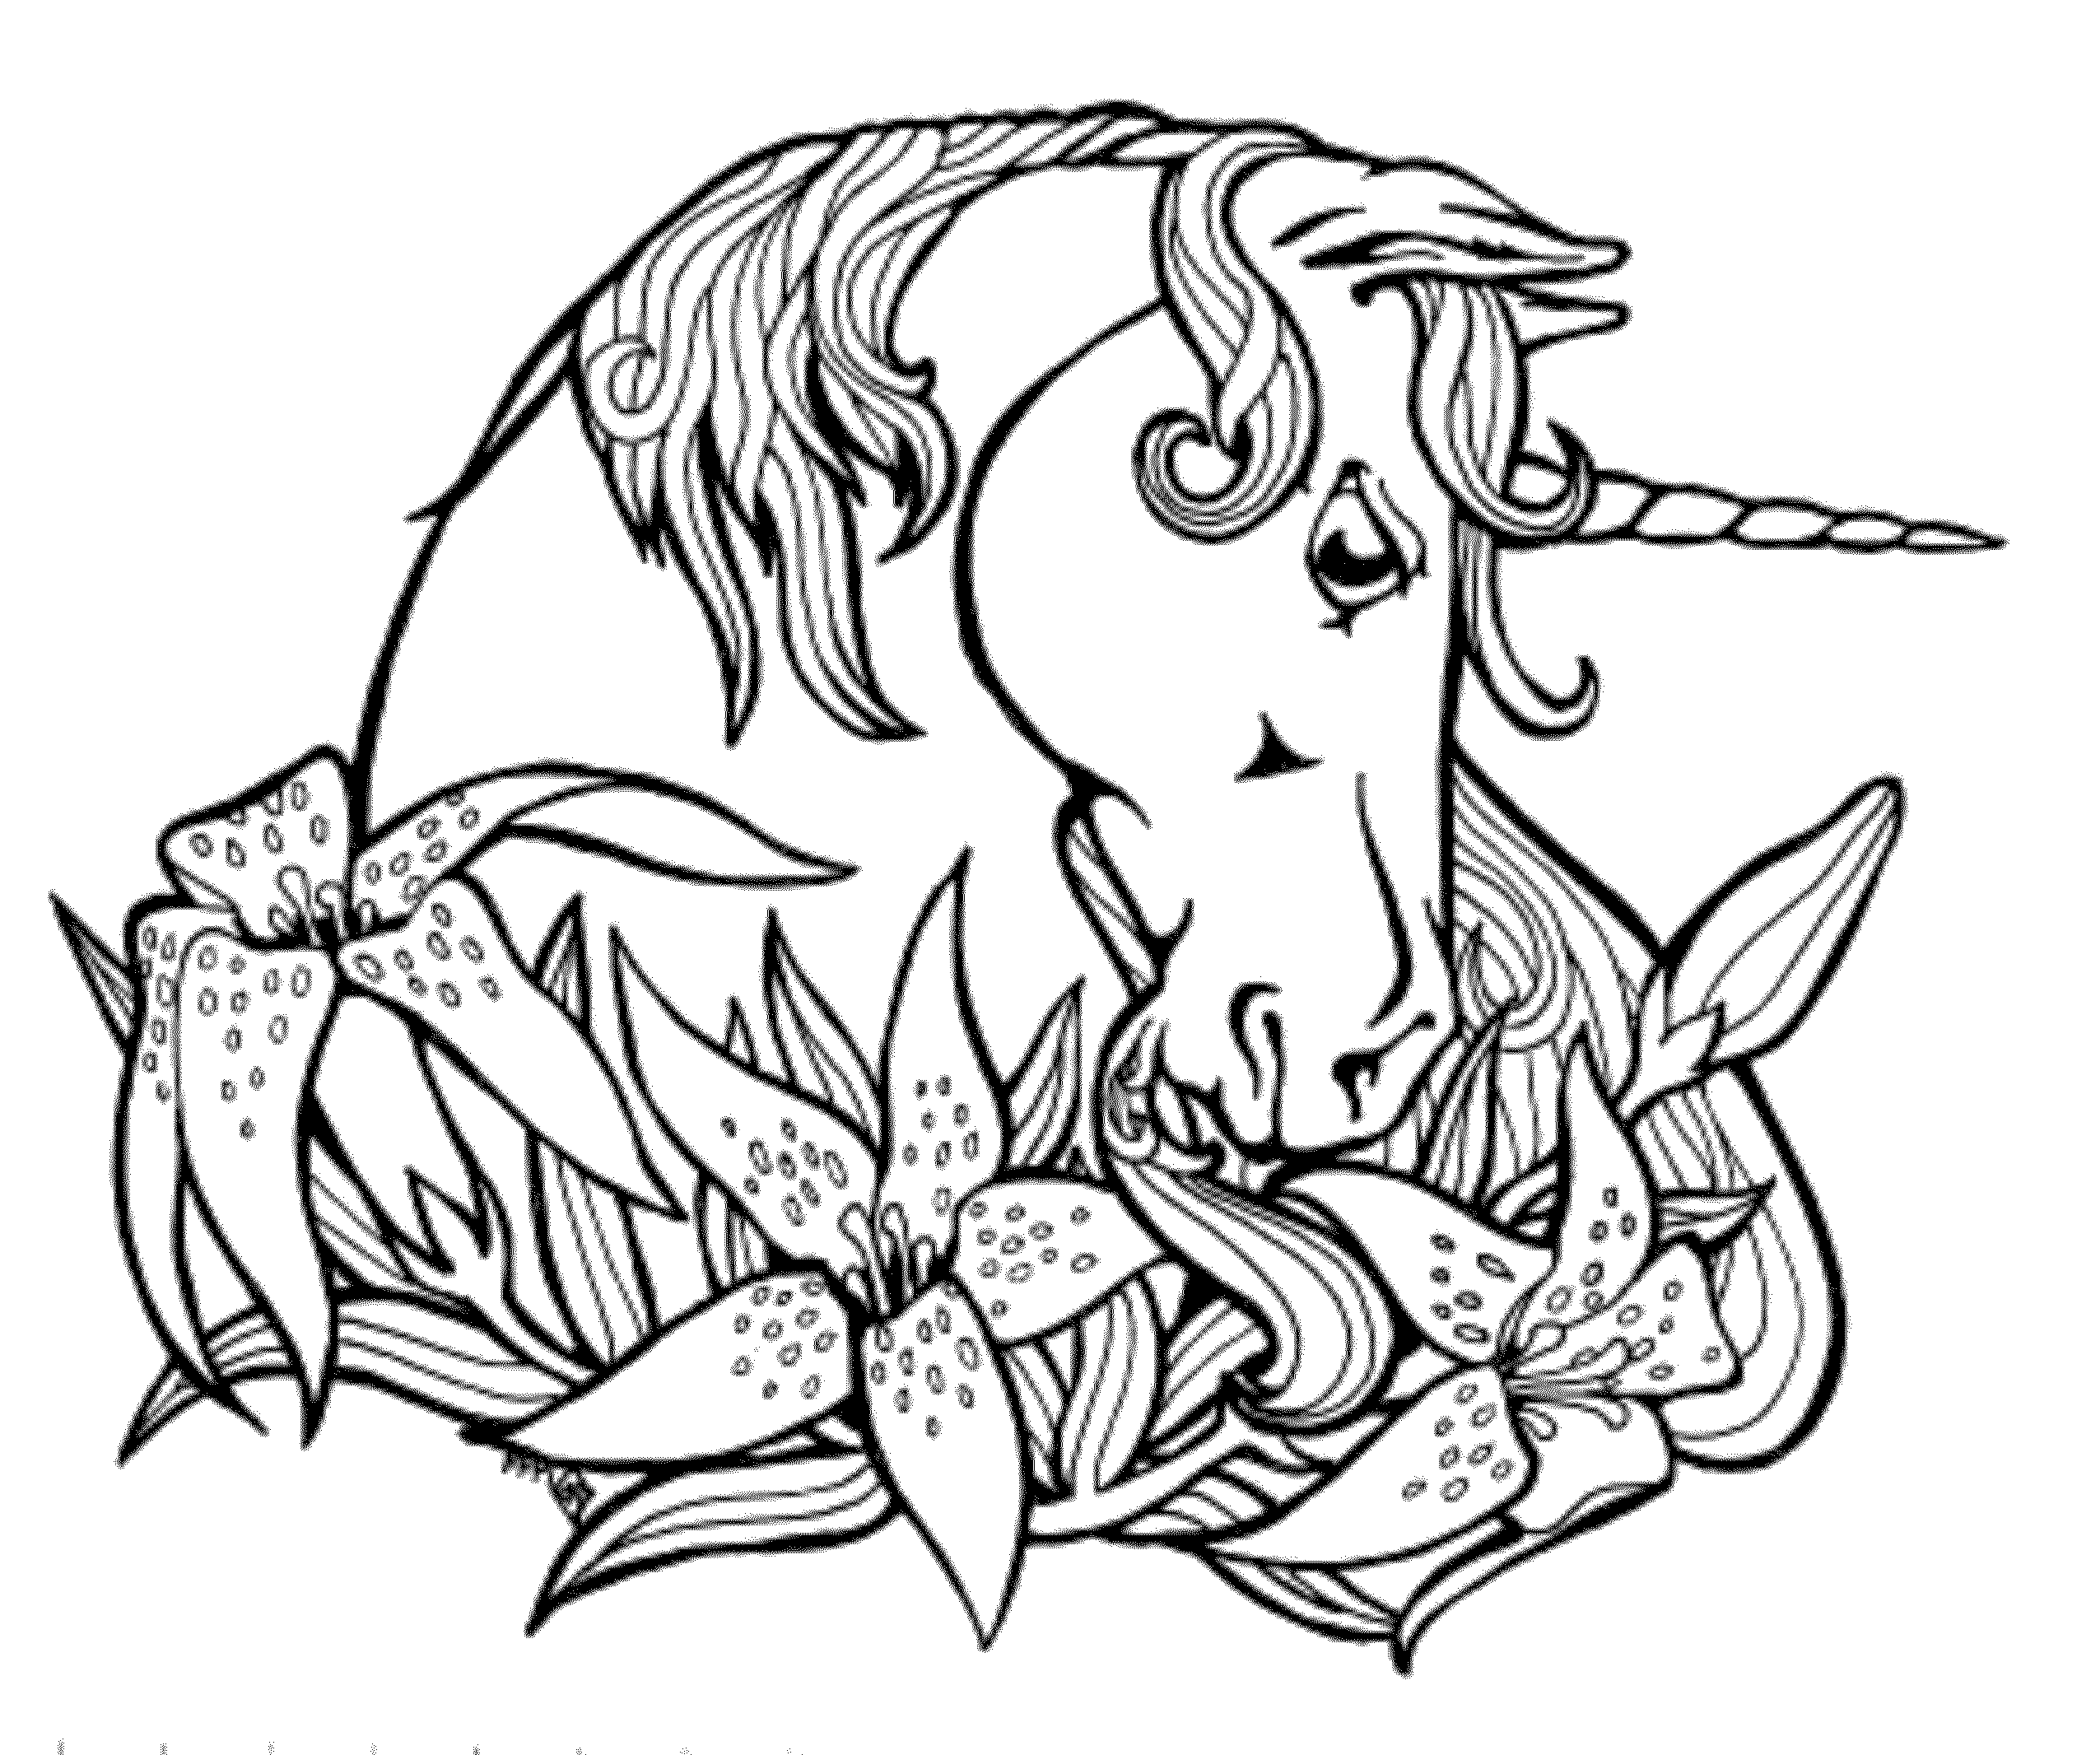 Download Print & Download - Unicorn Coloring Pages for Children